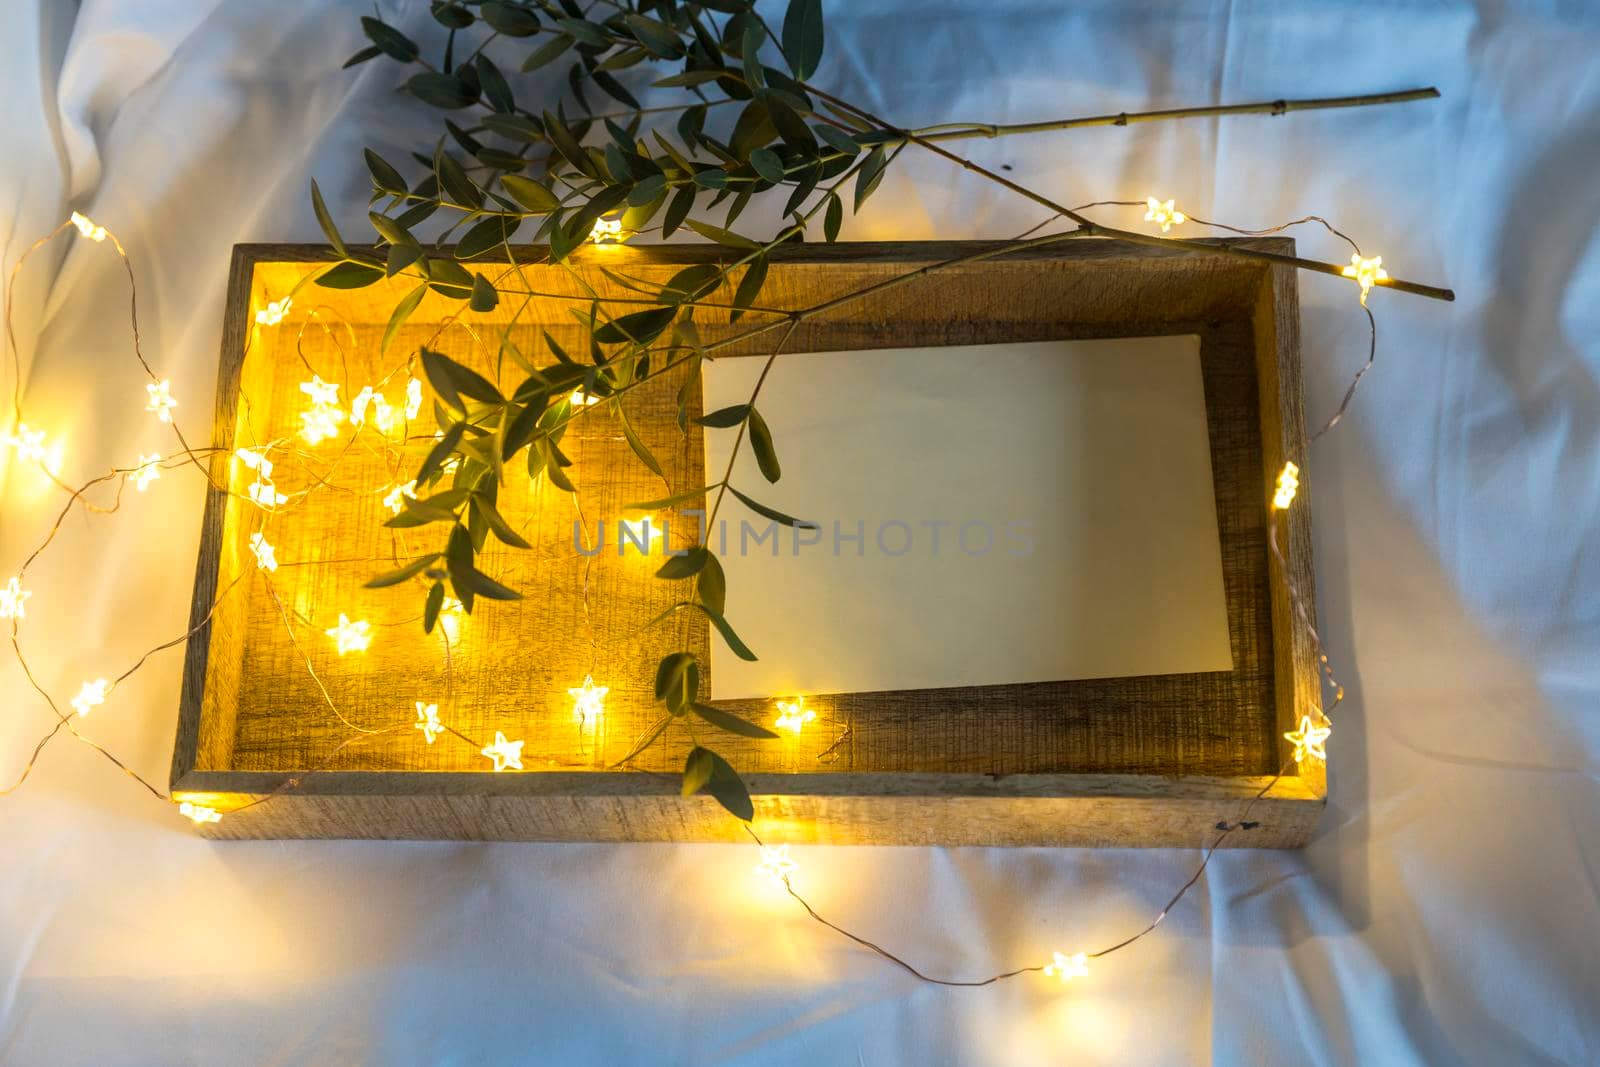 A eucalyptus branch lies on a white sheet beside a tray with a cup of tea and a saucer in a letter in an envelope. The garland is glowing. by elenarostunova